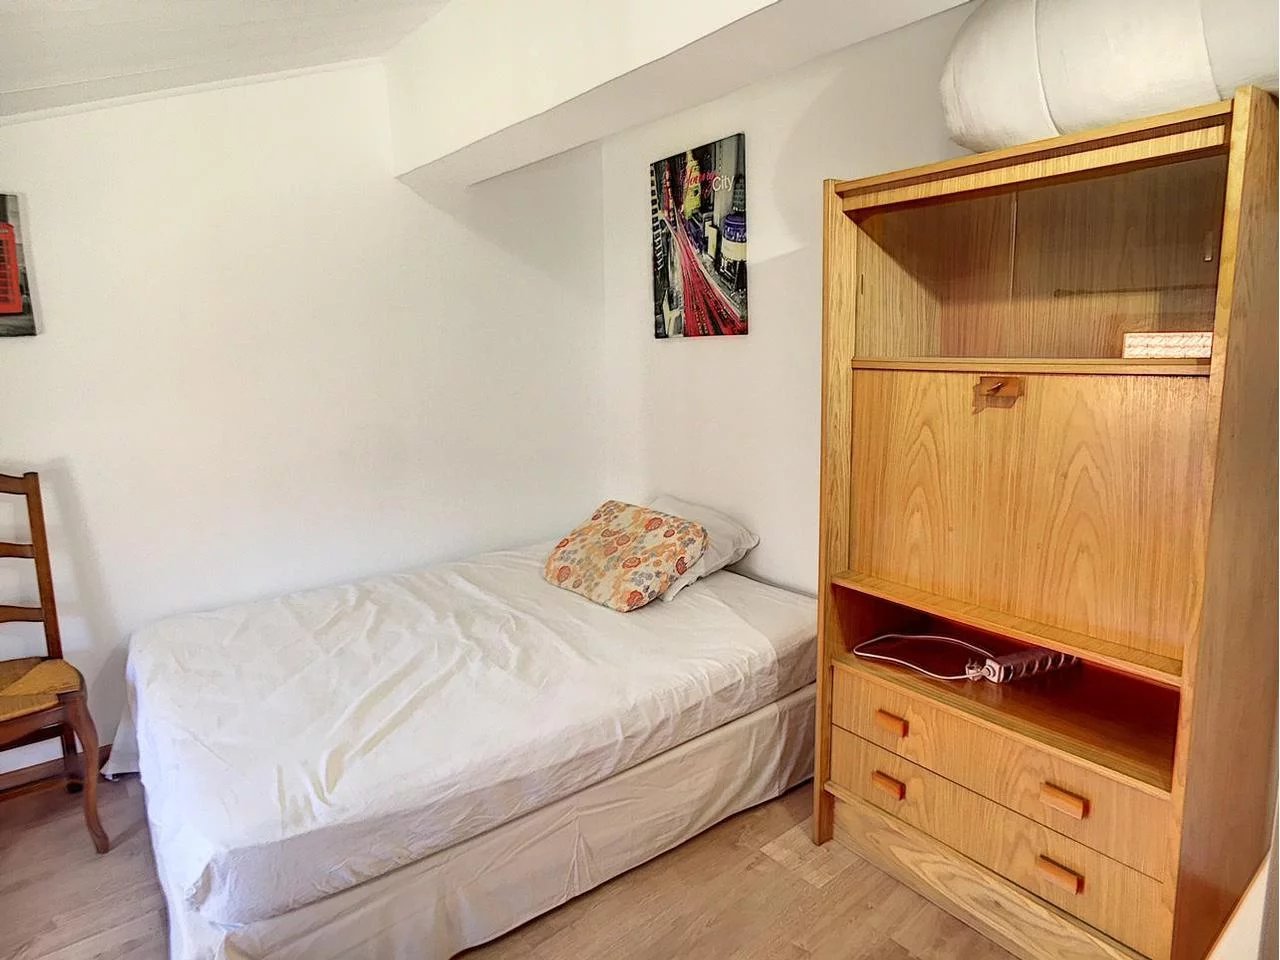 Appartement  3 Rooms 50m2  for sale   239 000 €